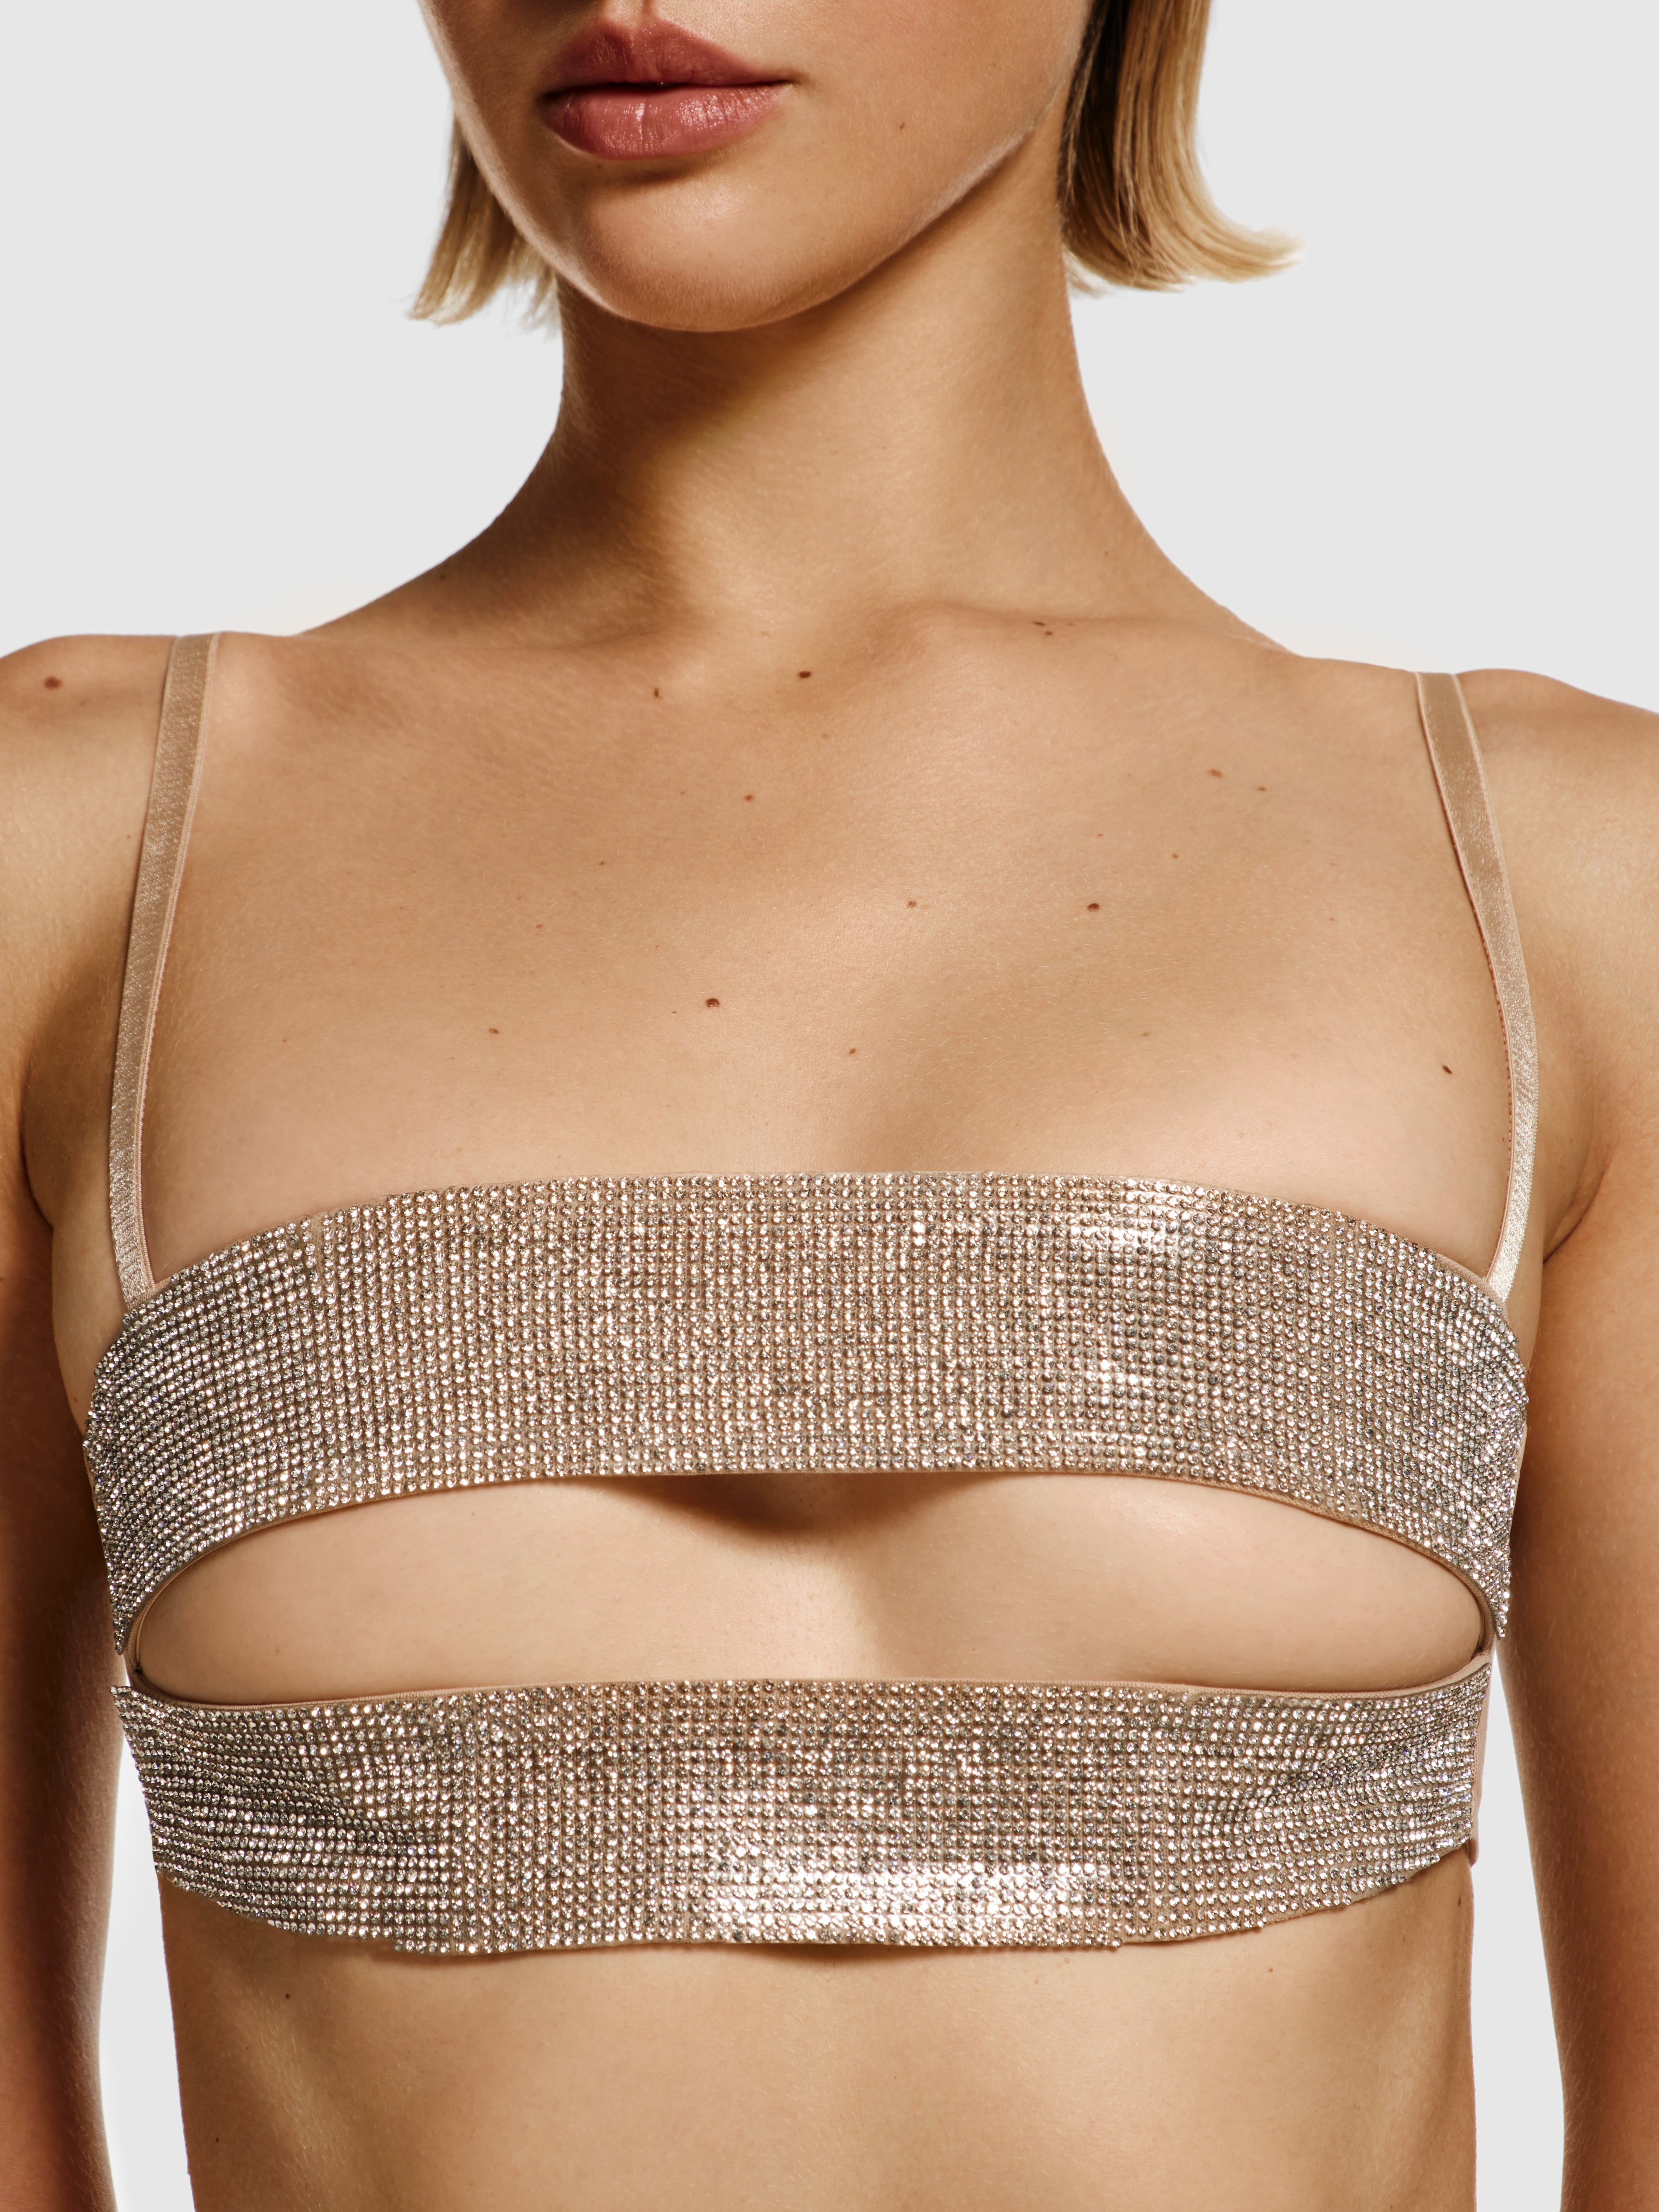 Medium closeup shot of a girl in nude beige a crop top decorated with rhinestones, featuring horizontal cut